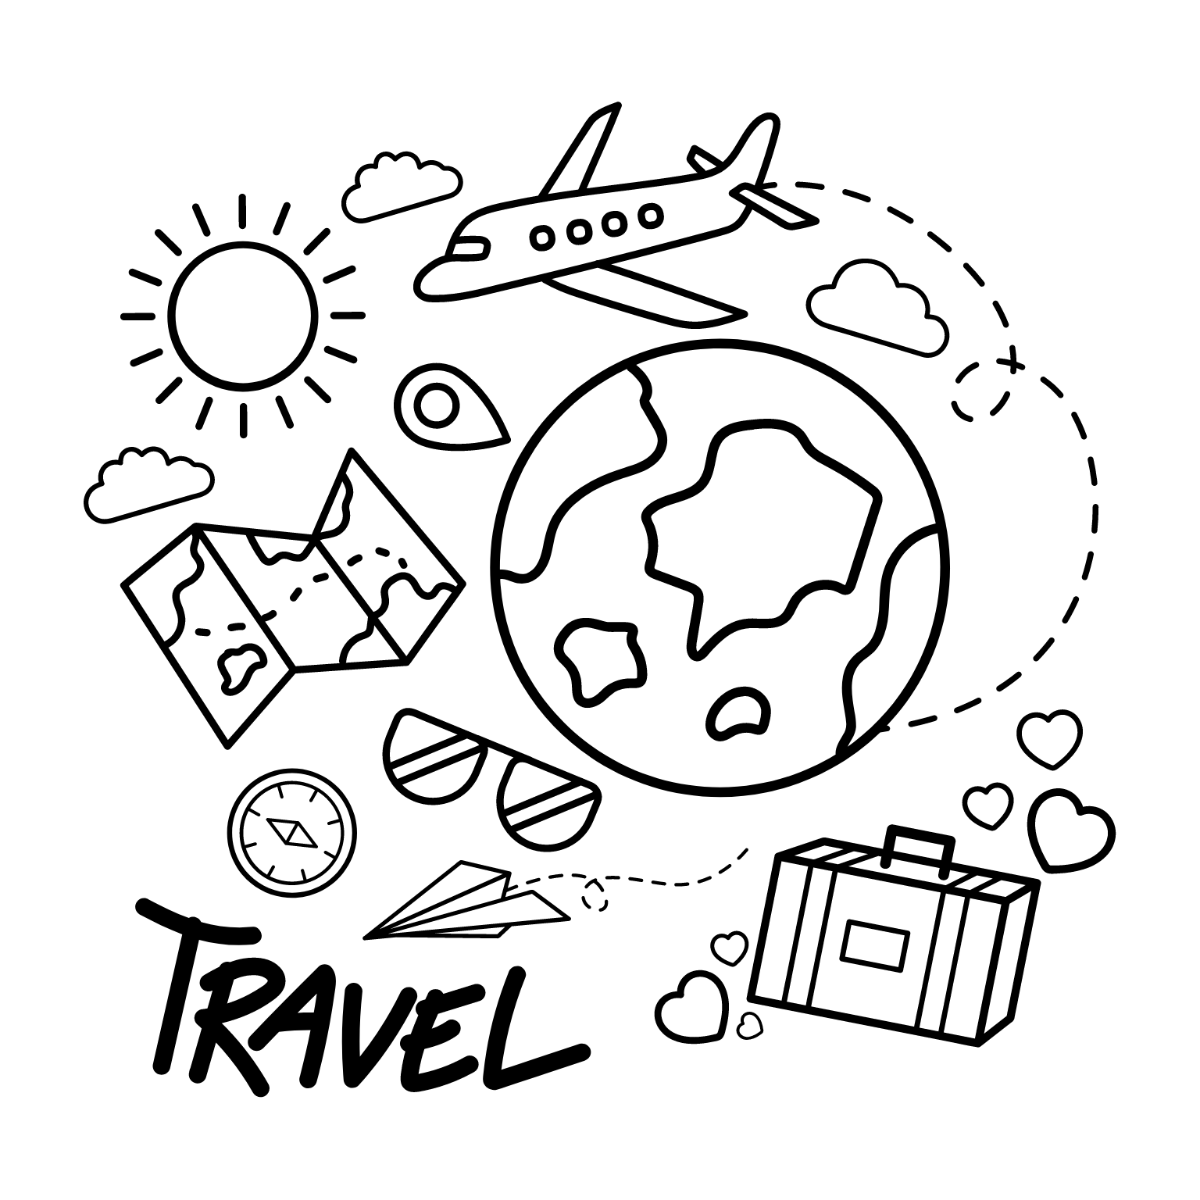 Free Travel Doodle Vector Template